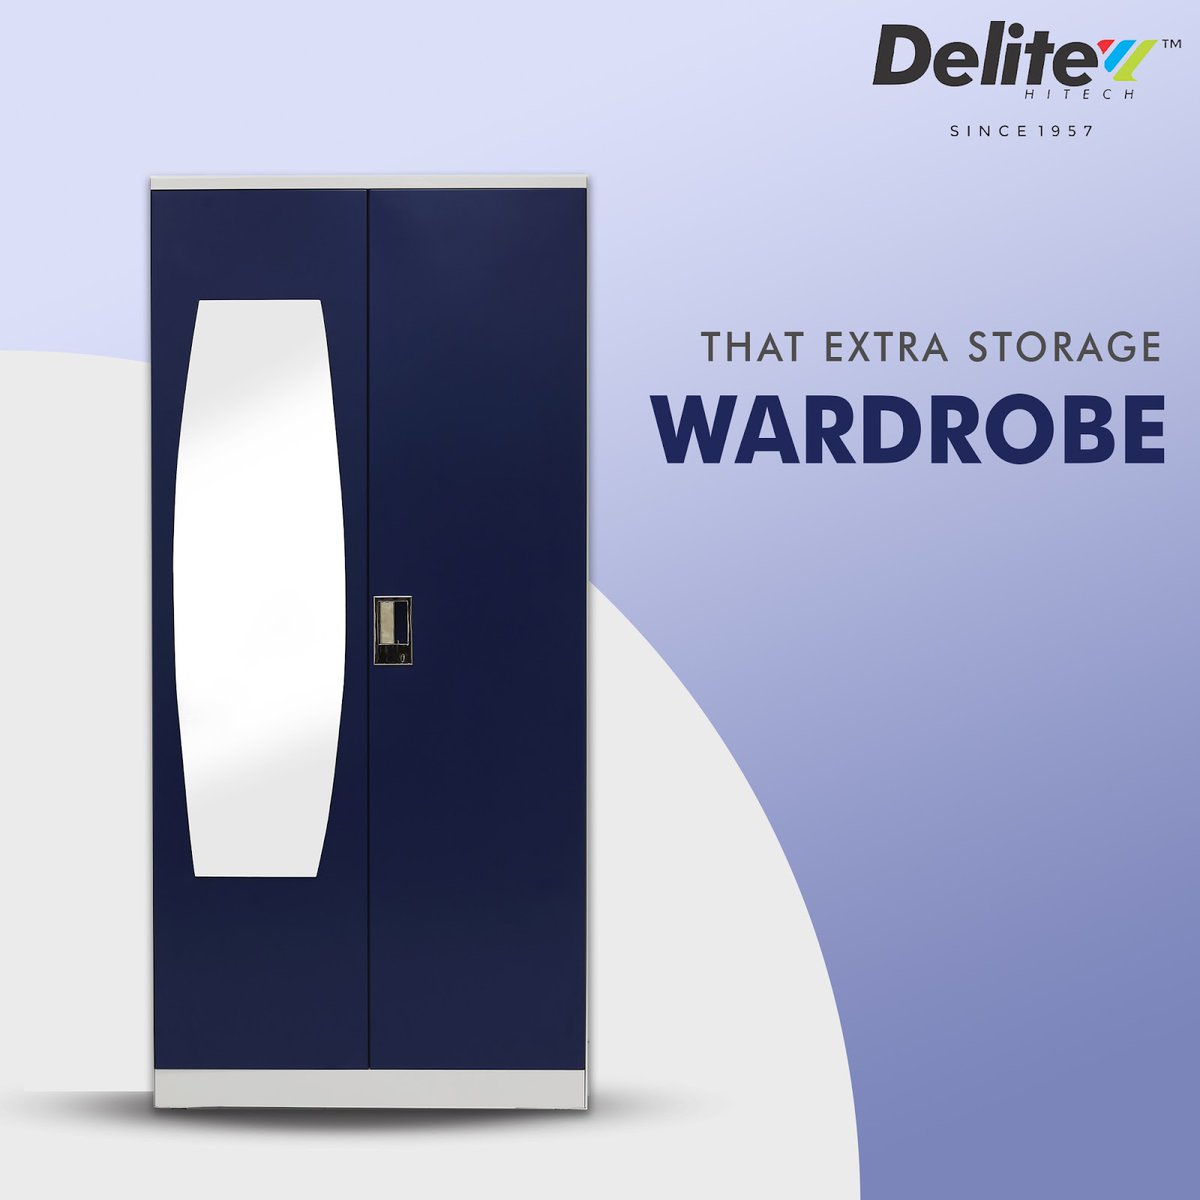 Experience High Style Exceptional design for your daily needs.
Visit now.
#wardrobes #interiordesign #homedecor #wardrobe #storage #furniture #interiors #design #wardrobedesign #interior #kitchens #storageideas #bedroomdecor #cabinetry #bedroom #builtinwardrobes #wardrobetips